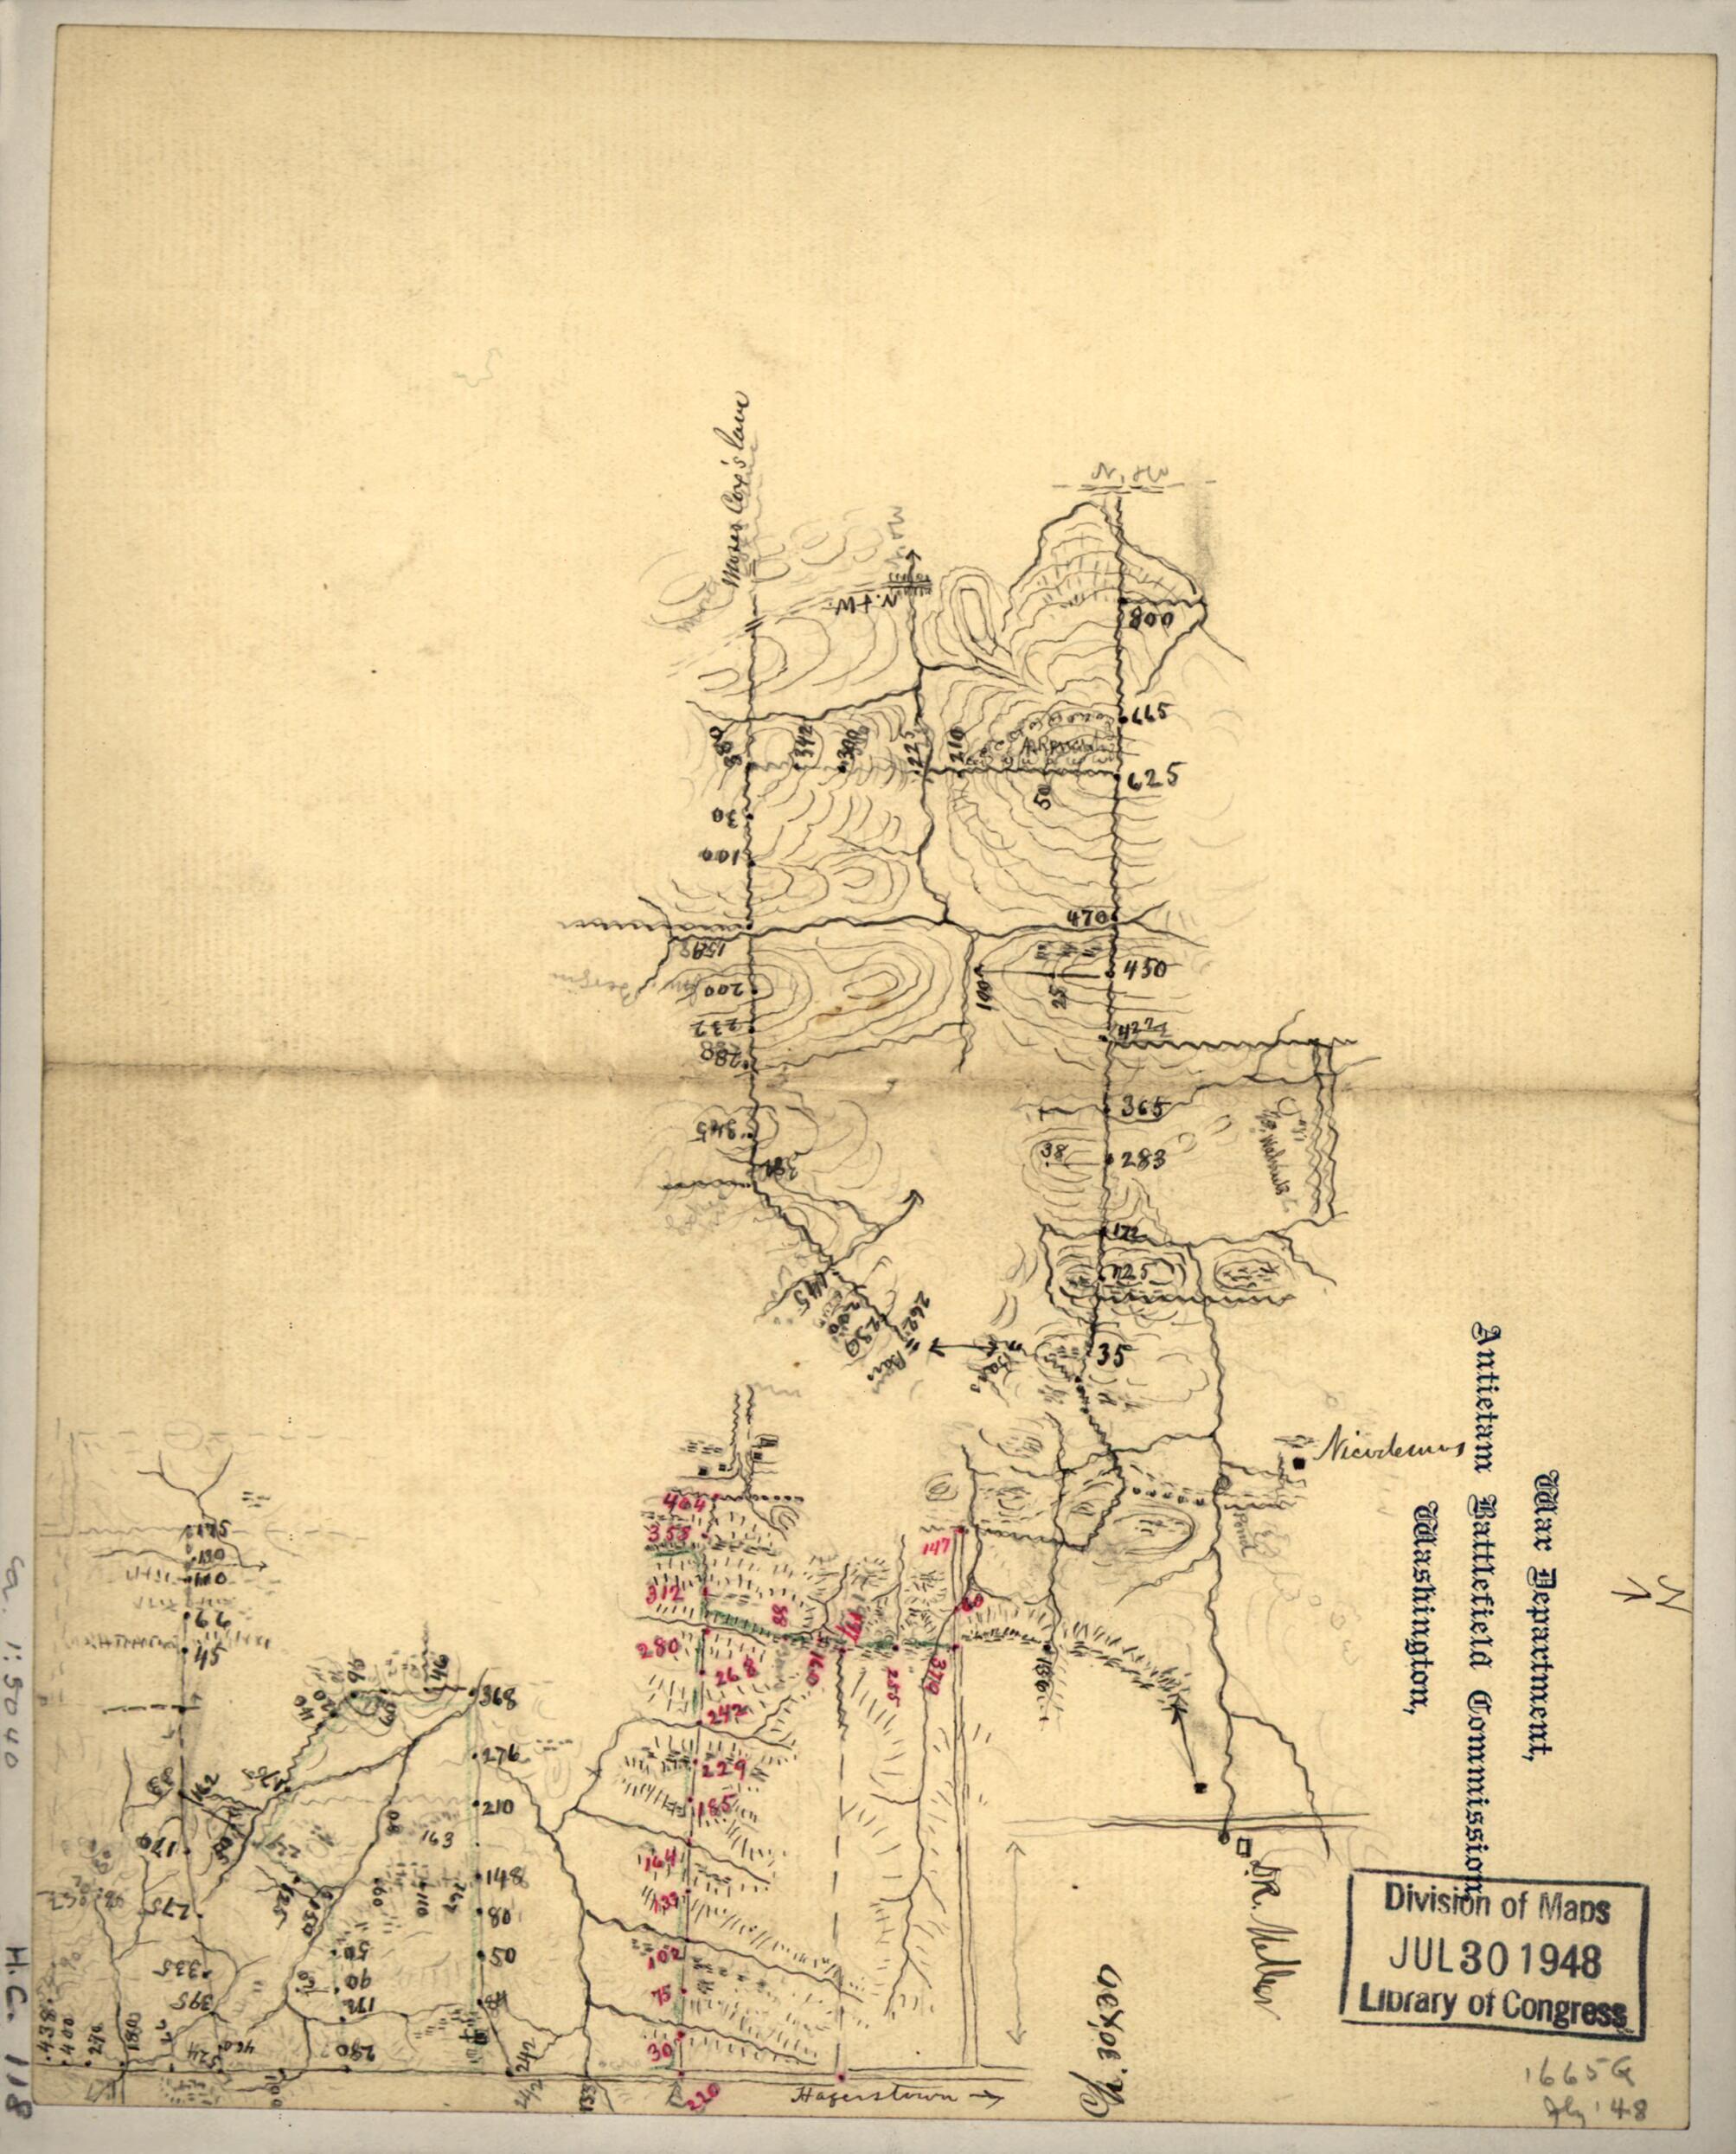 This old map of Preliminary Field Sketch of Part of the Antietam Battlefield, In the Area North of Sharpsburg from 1895 was created by  in 1895